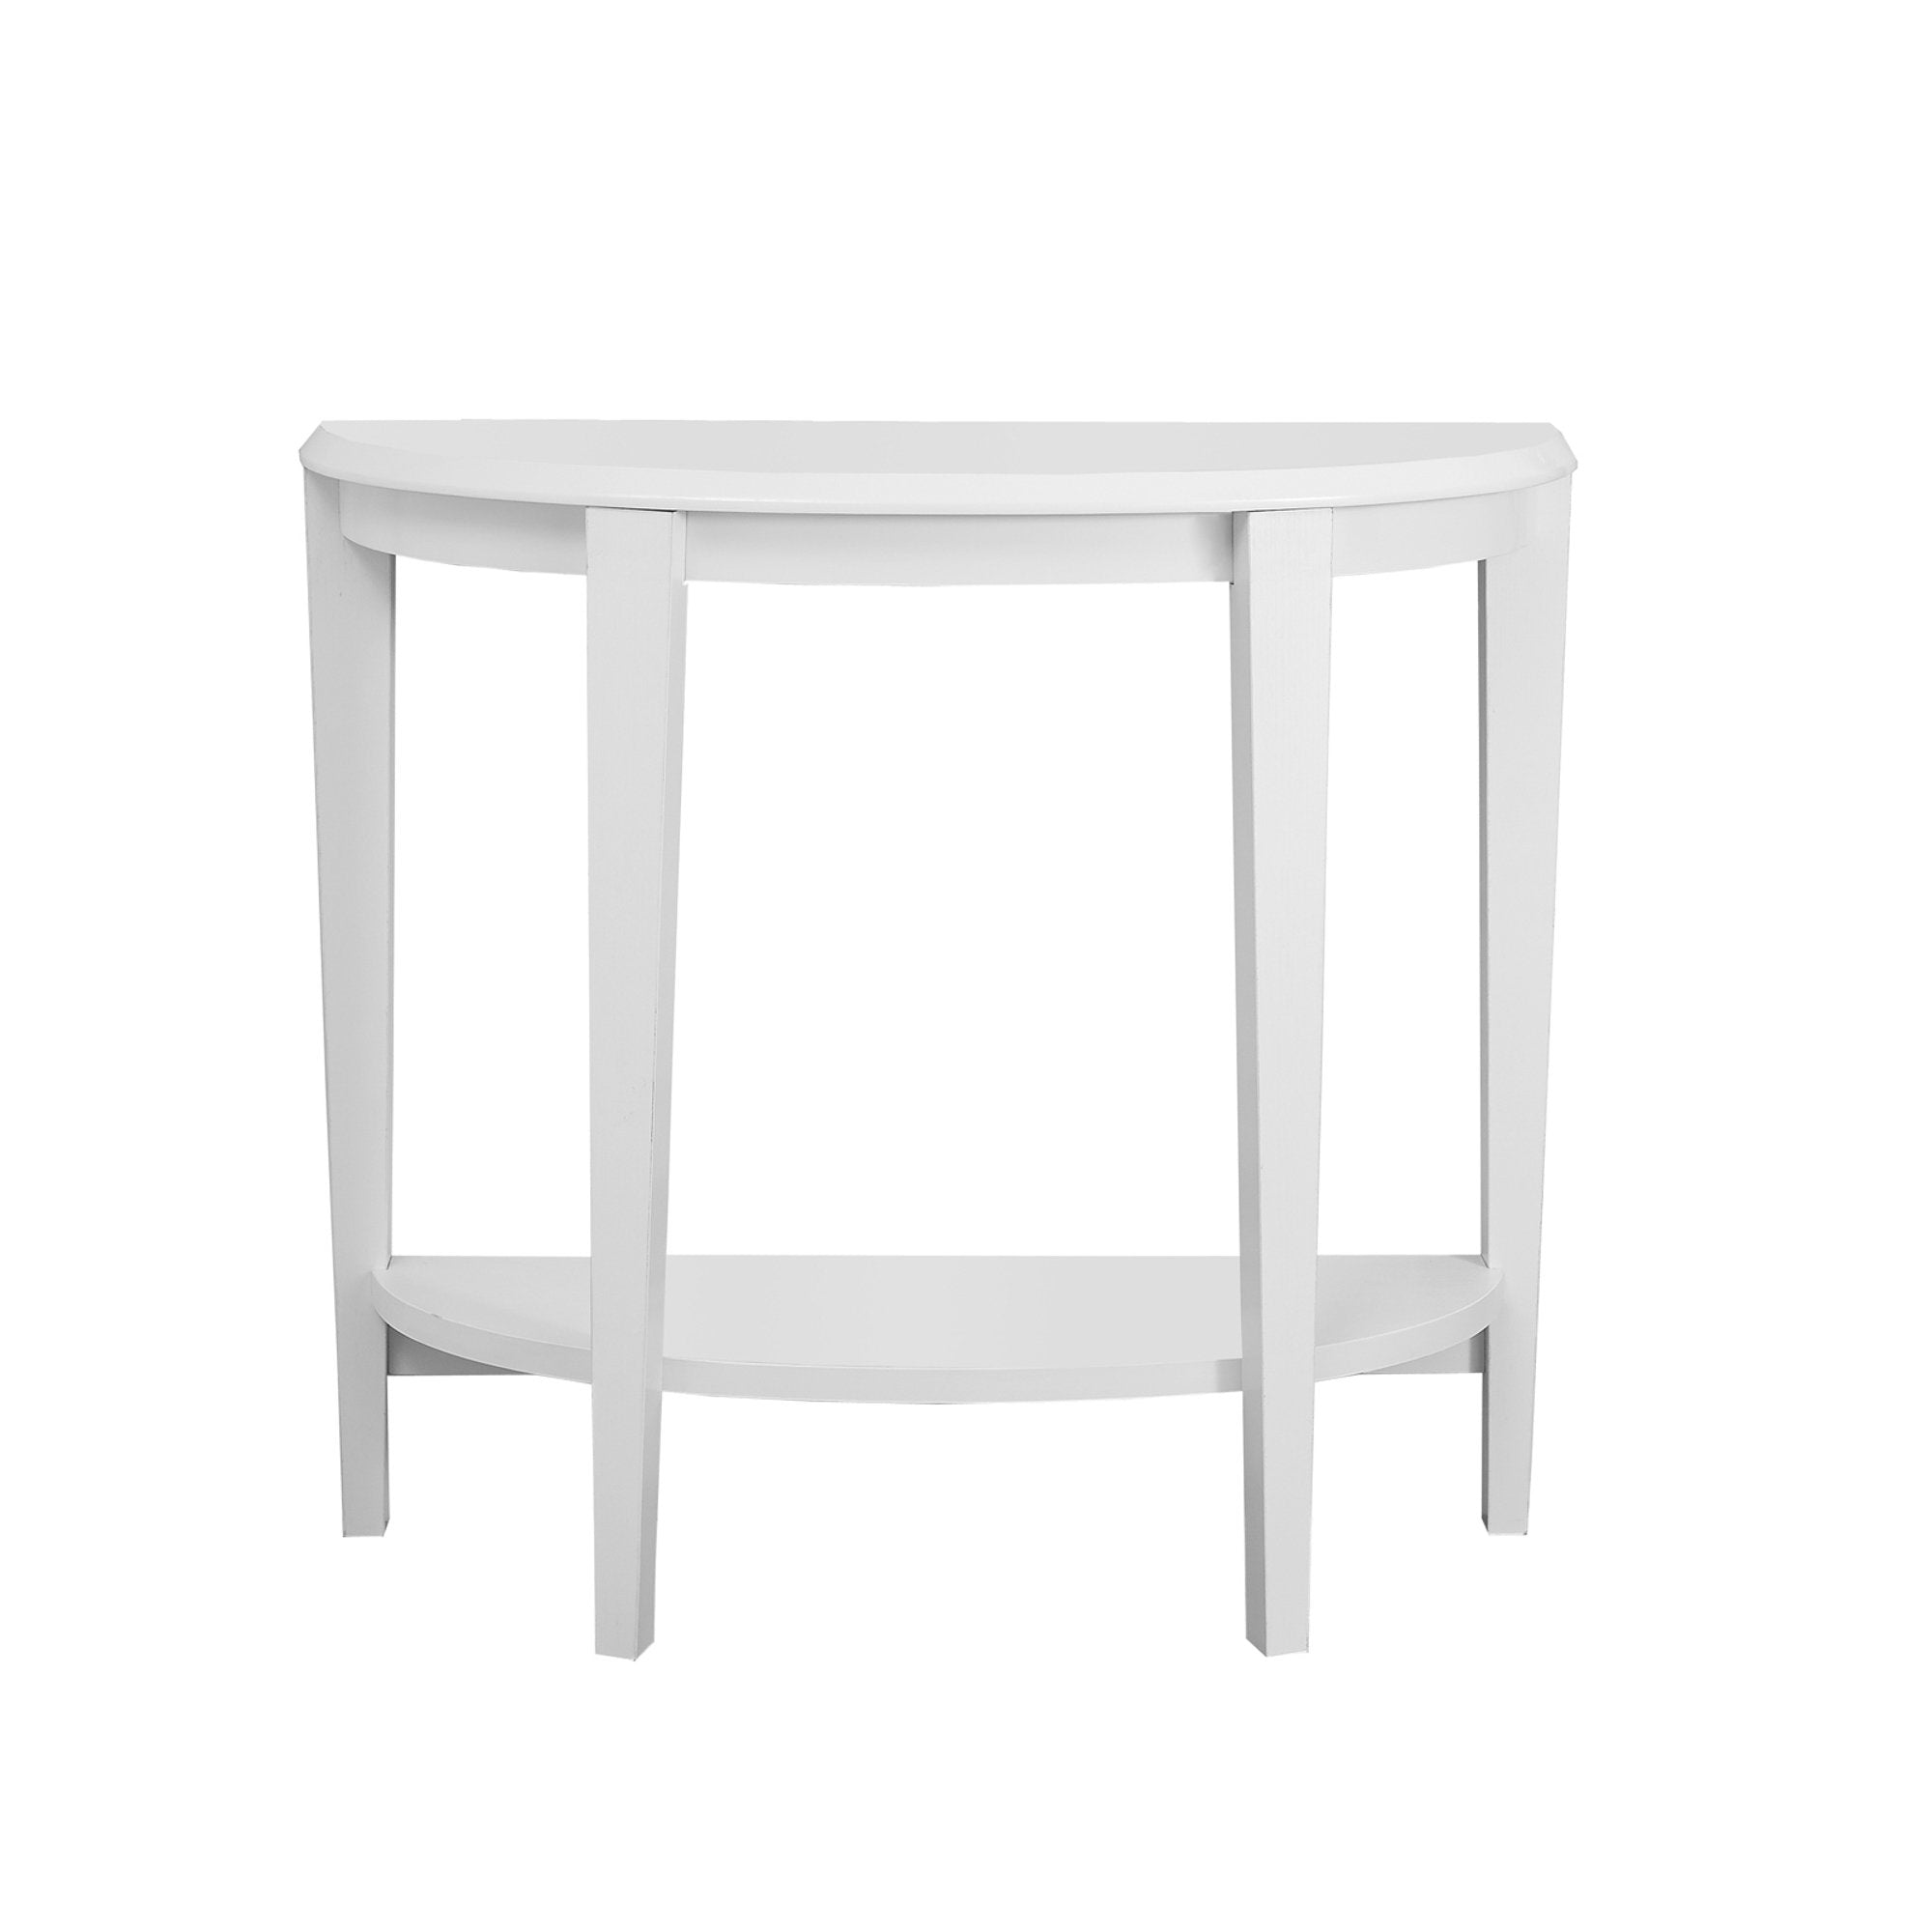 MN-252451    Accent Table, Console, Entryway, Narrow, Sofa, Living Room, Bedroom, Laminate, White, White, Contemporary, Modern